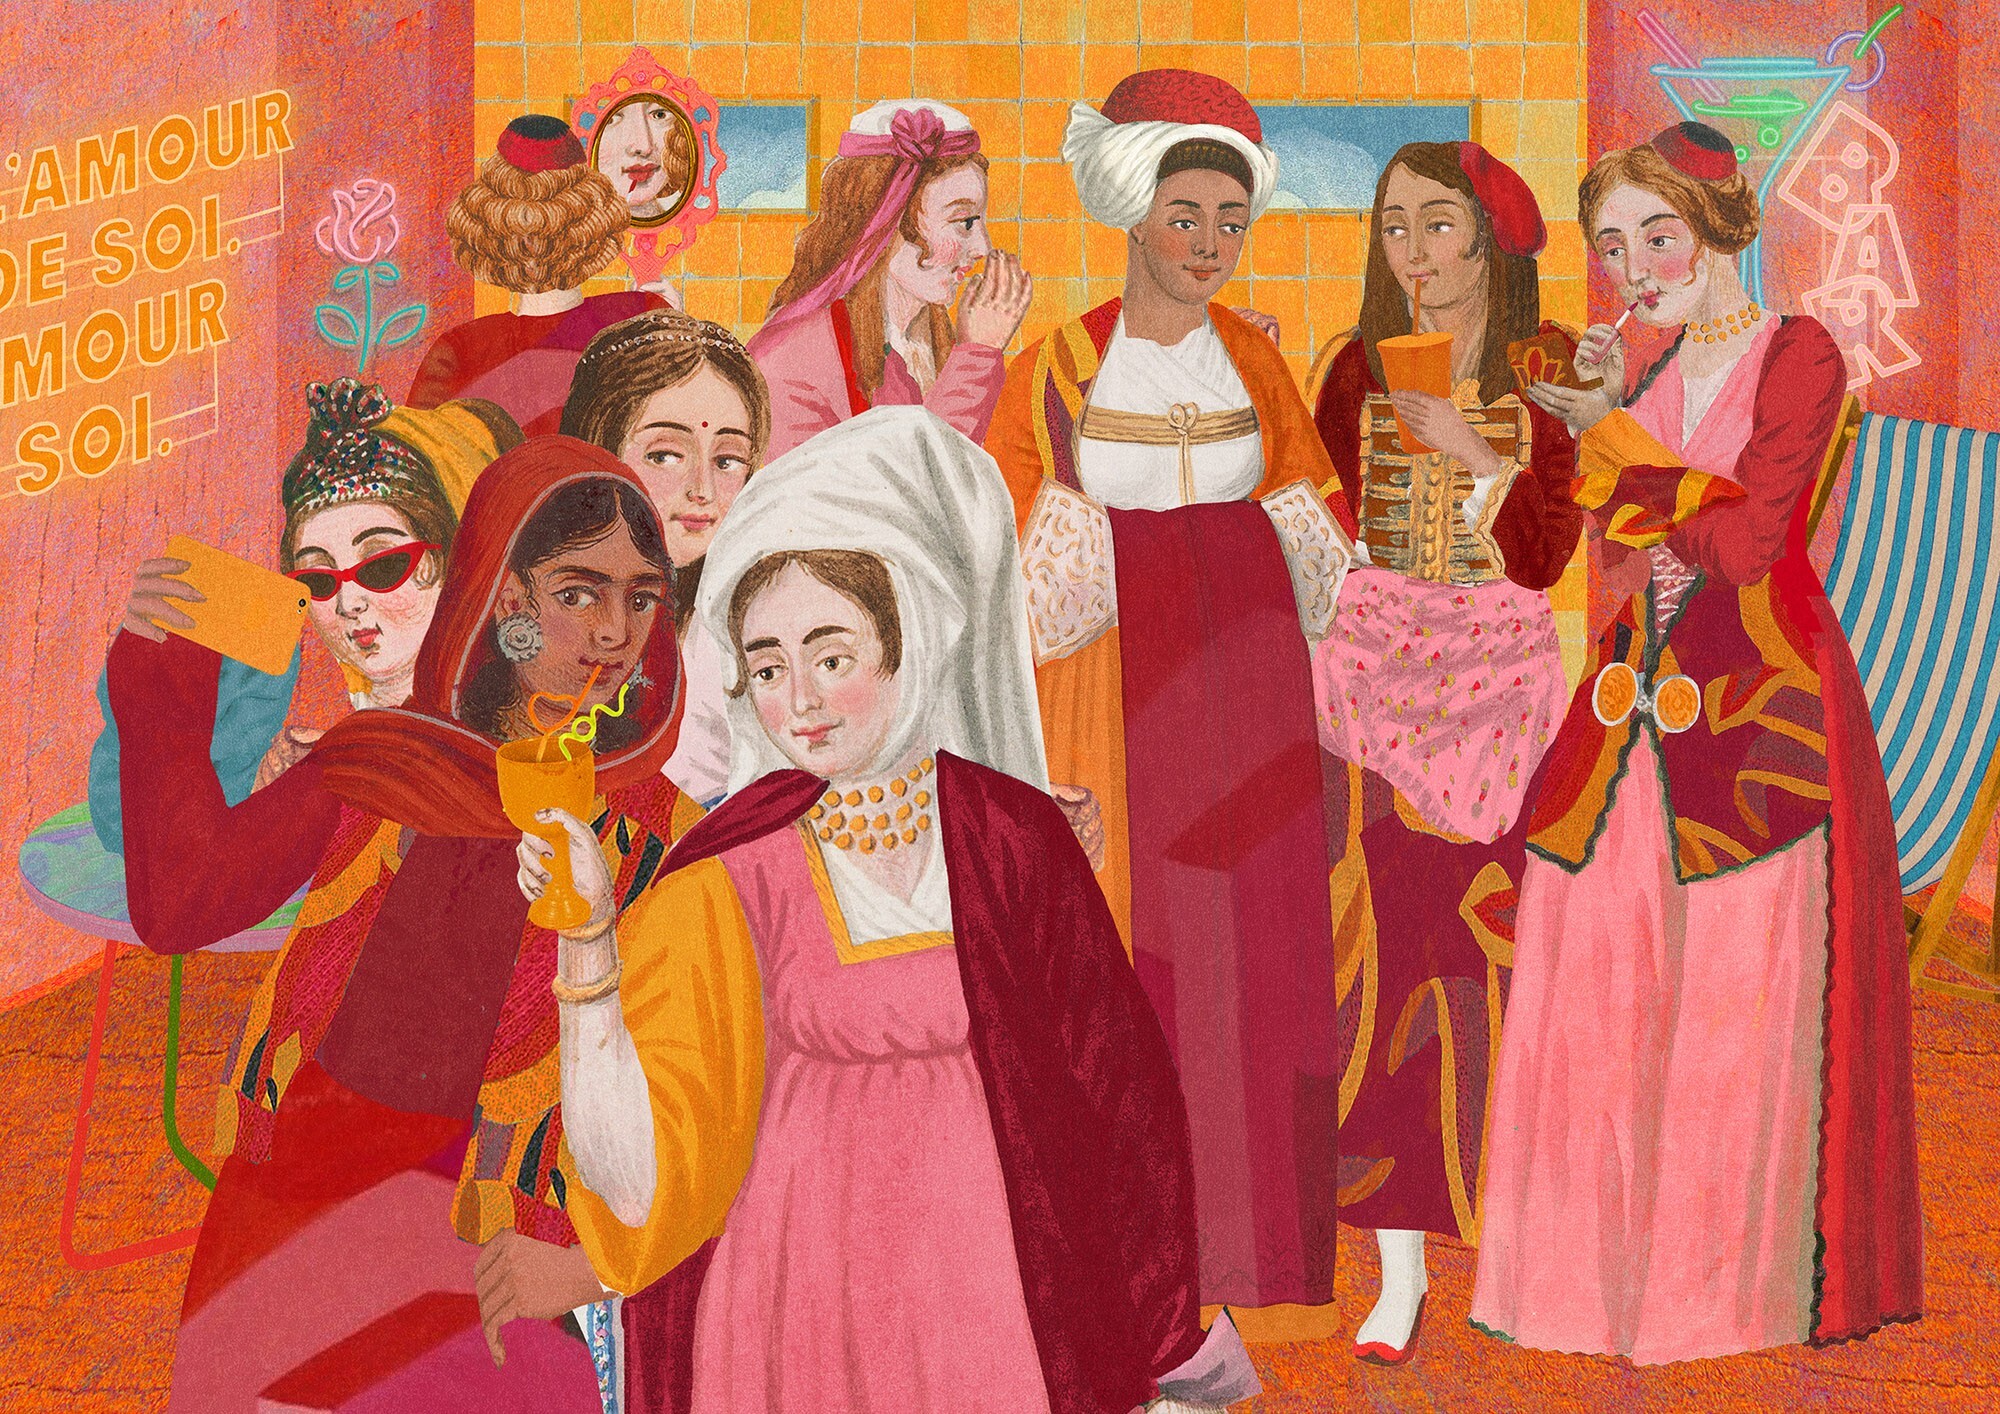 Indonesian artist Anindya Anugrah’s illustration Powder Room, of women in historical dress taking selfies, is an example of how she marries the medieval with the modern.